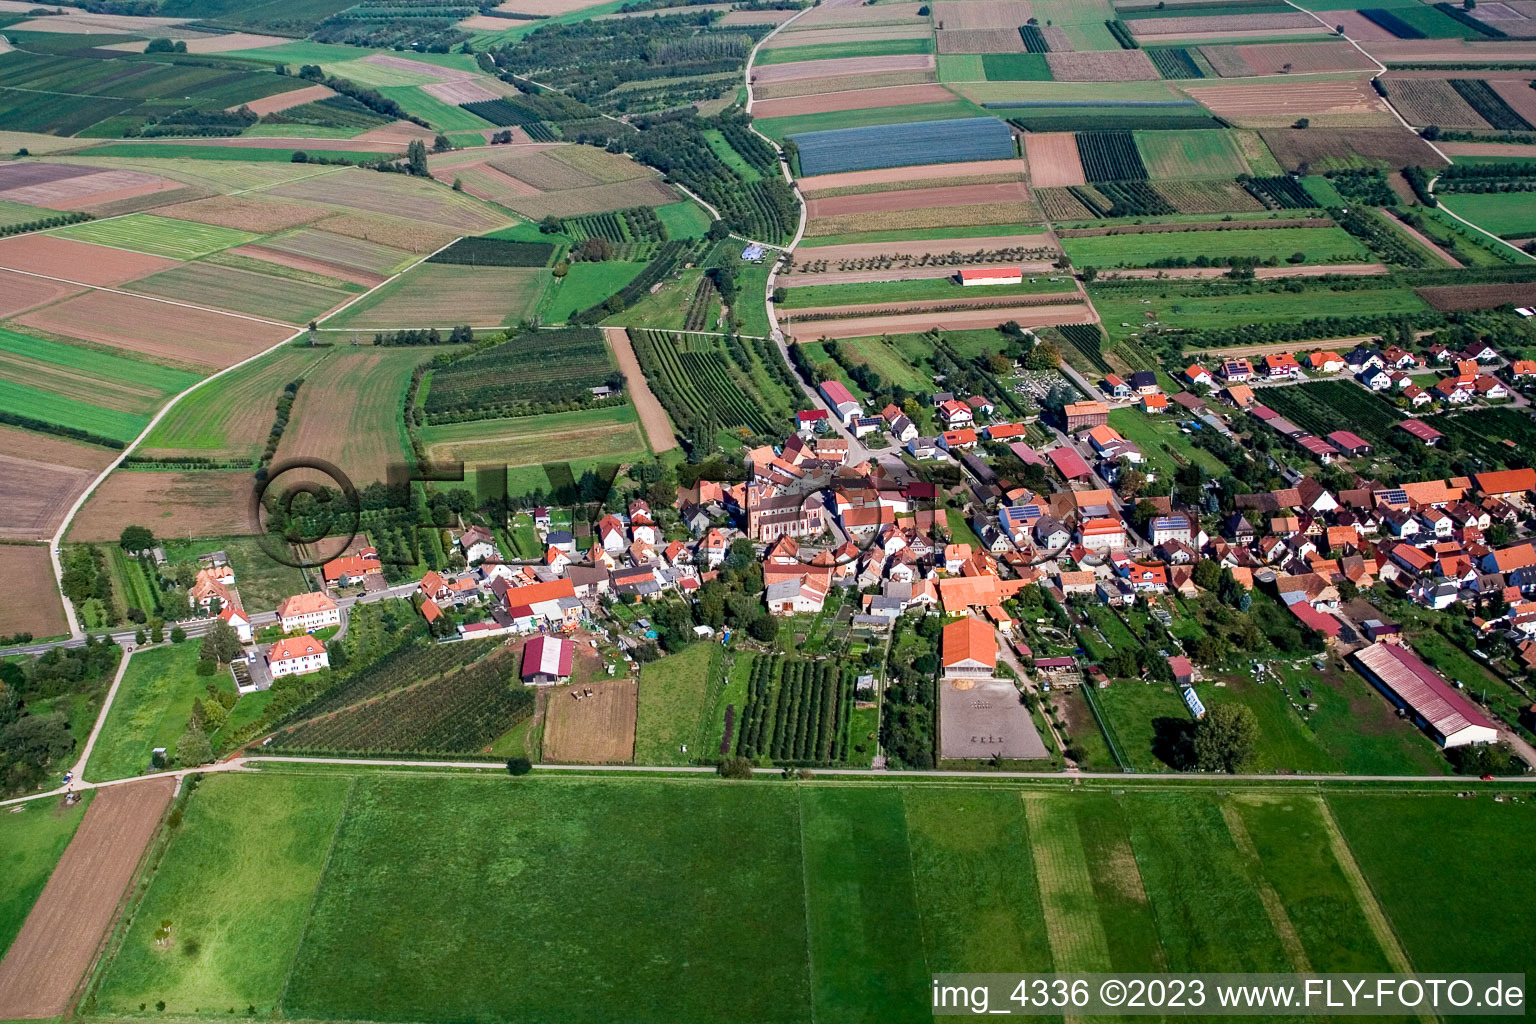 Aerial photograpy of Schweighofen in the state Rhineland-Palatinate, Germany